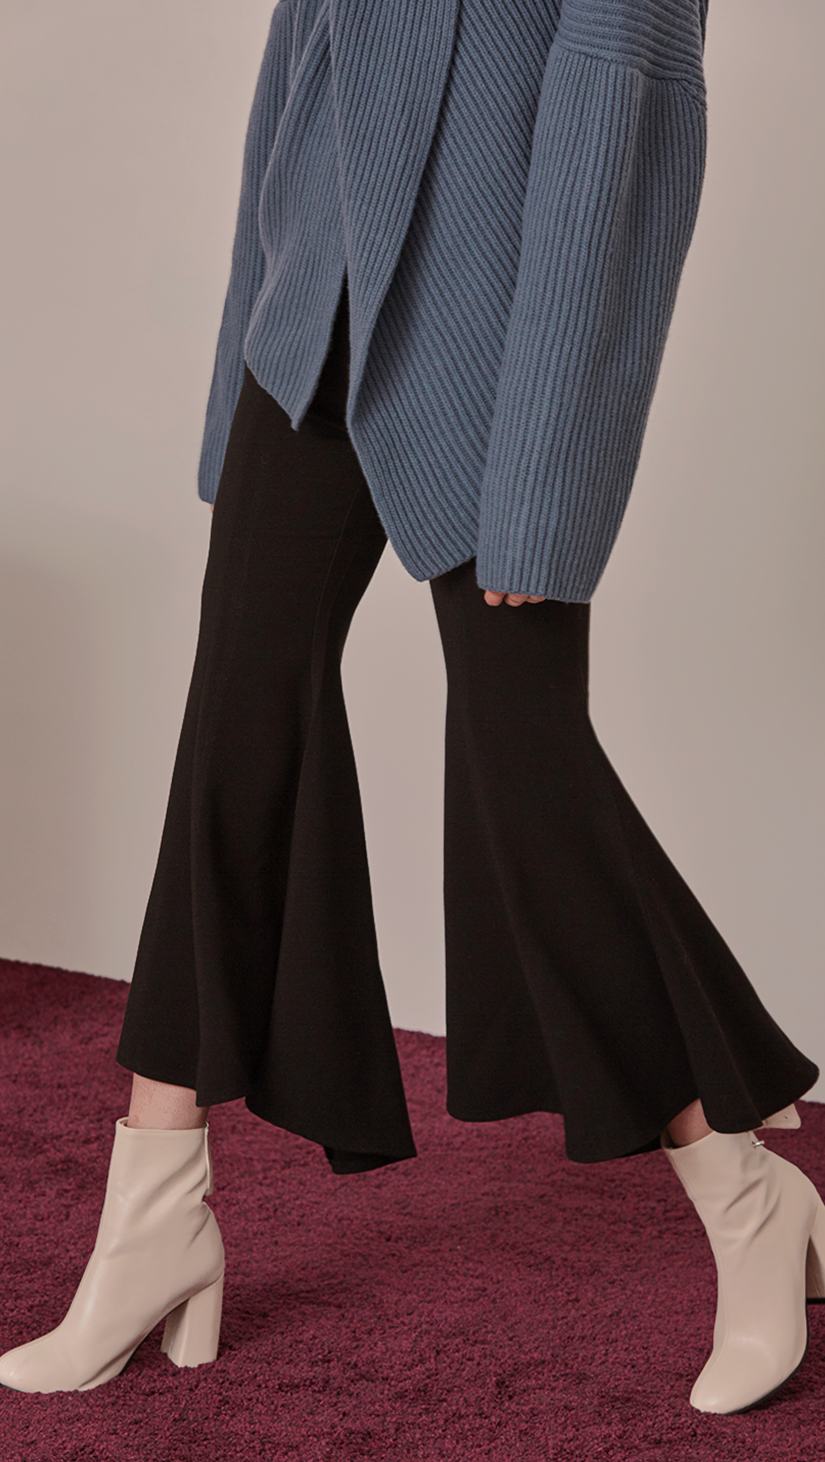 Asymmetric edged peplum leg pant. Centre-front concealed zip fastening along side. No pockets. Slim-fitting at thigh. Gently flare out hem. Designed for high-rise cut. Mid rise with a wide frayed leg.